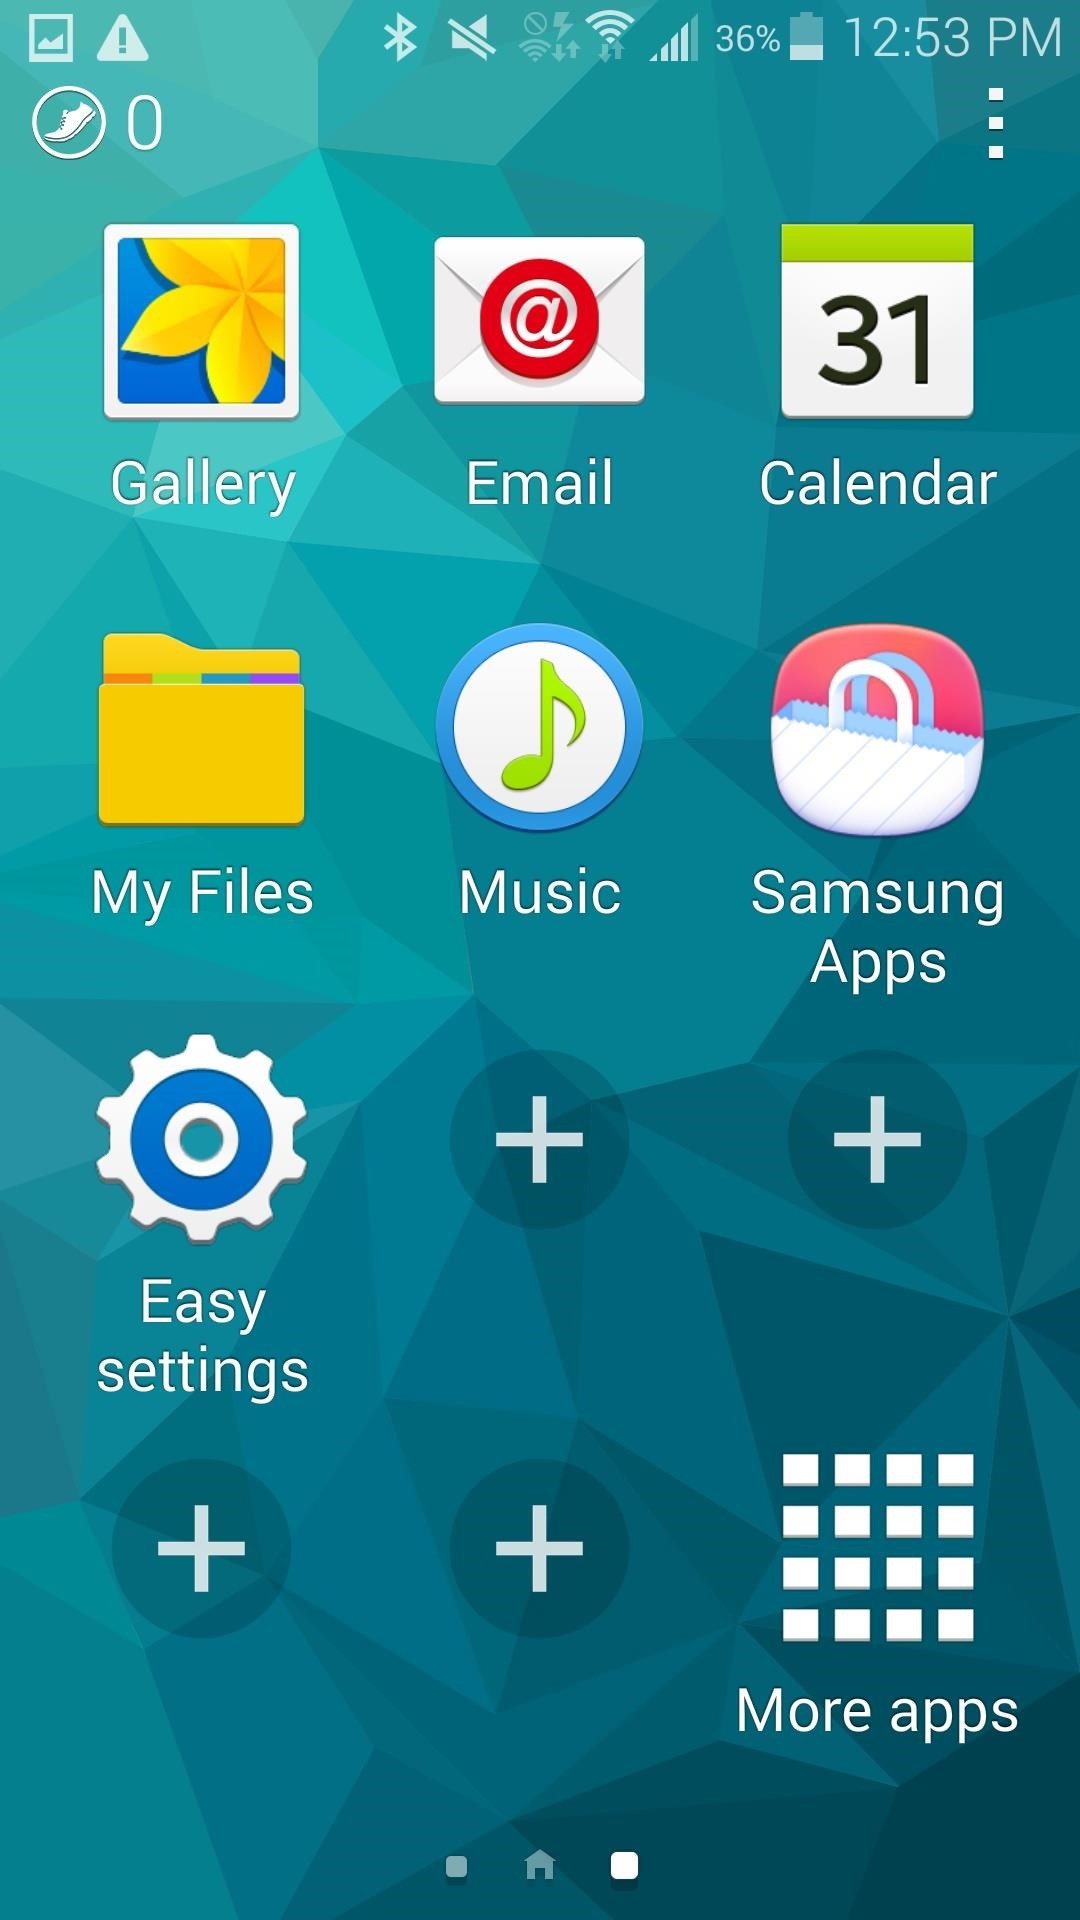 How to Set Up Your Grandma's Samsung Galaxy S5 for Easier Use (& Less Questions for You)